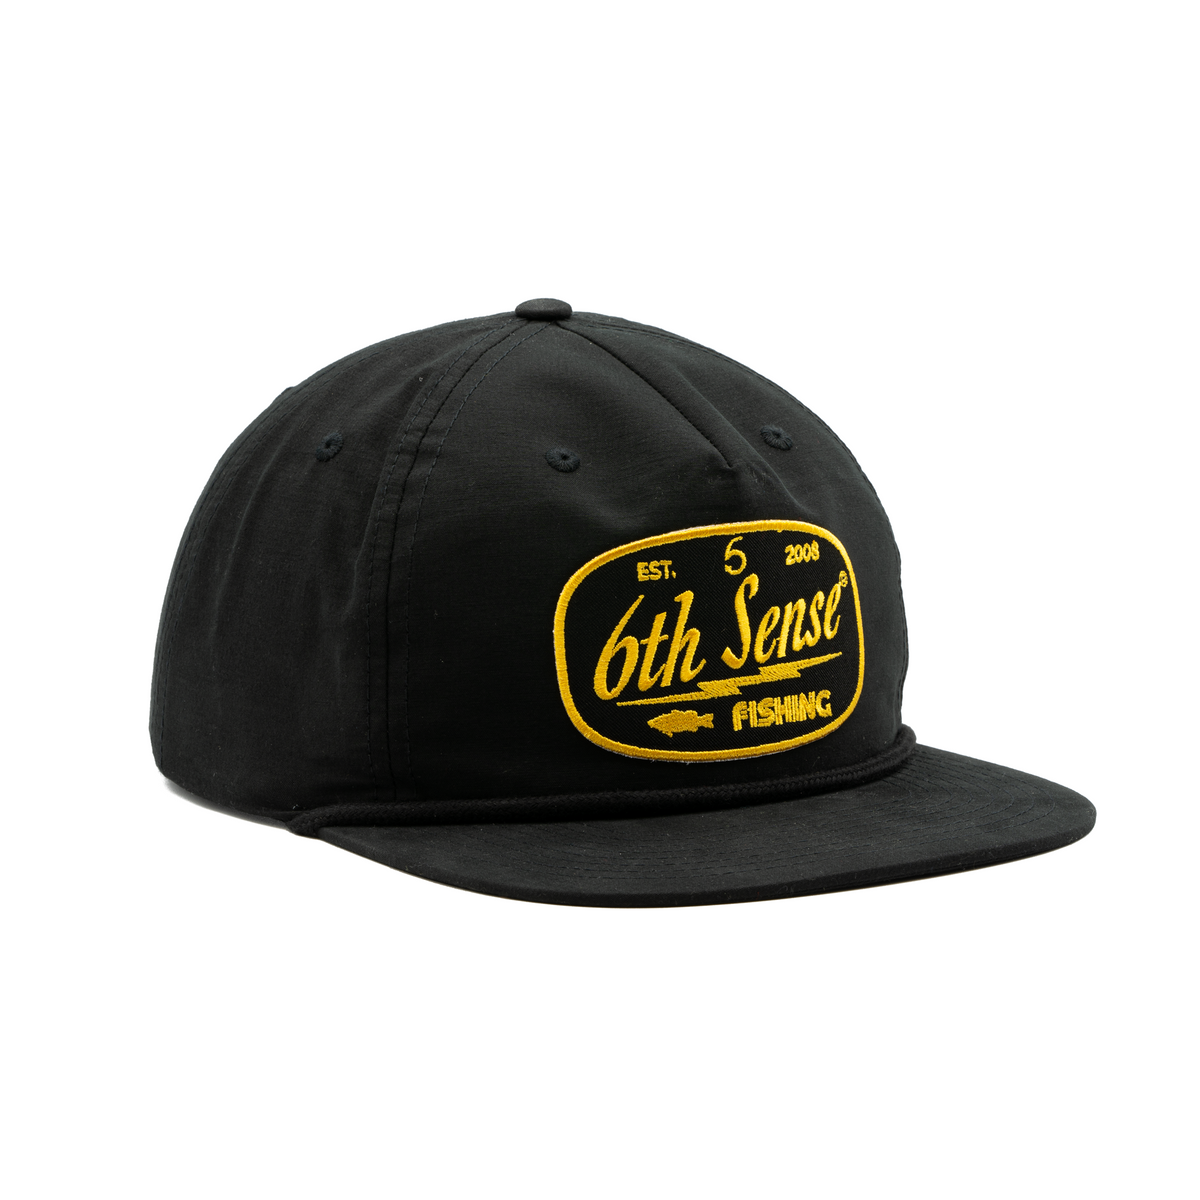 6th Sense Hats Old Timer - Boogie Nights (Limited Edition)